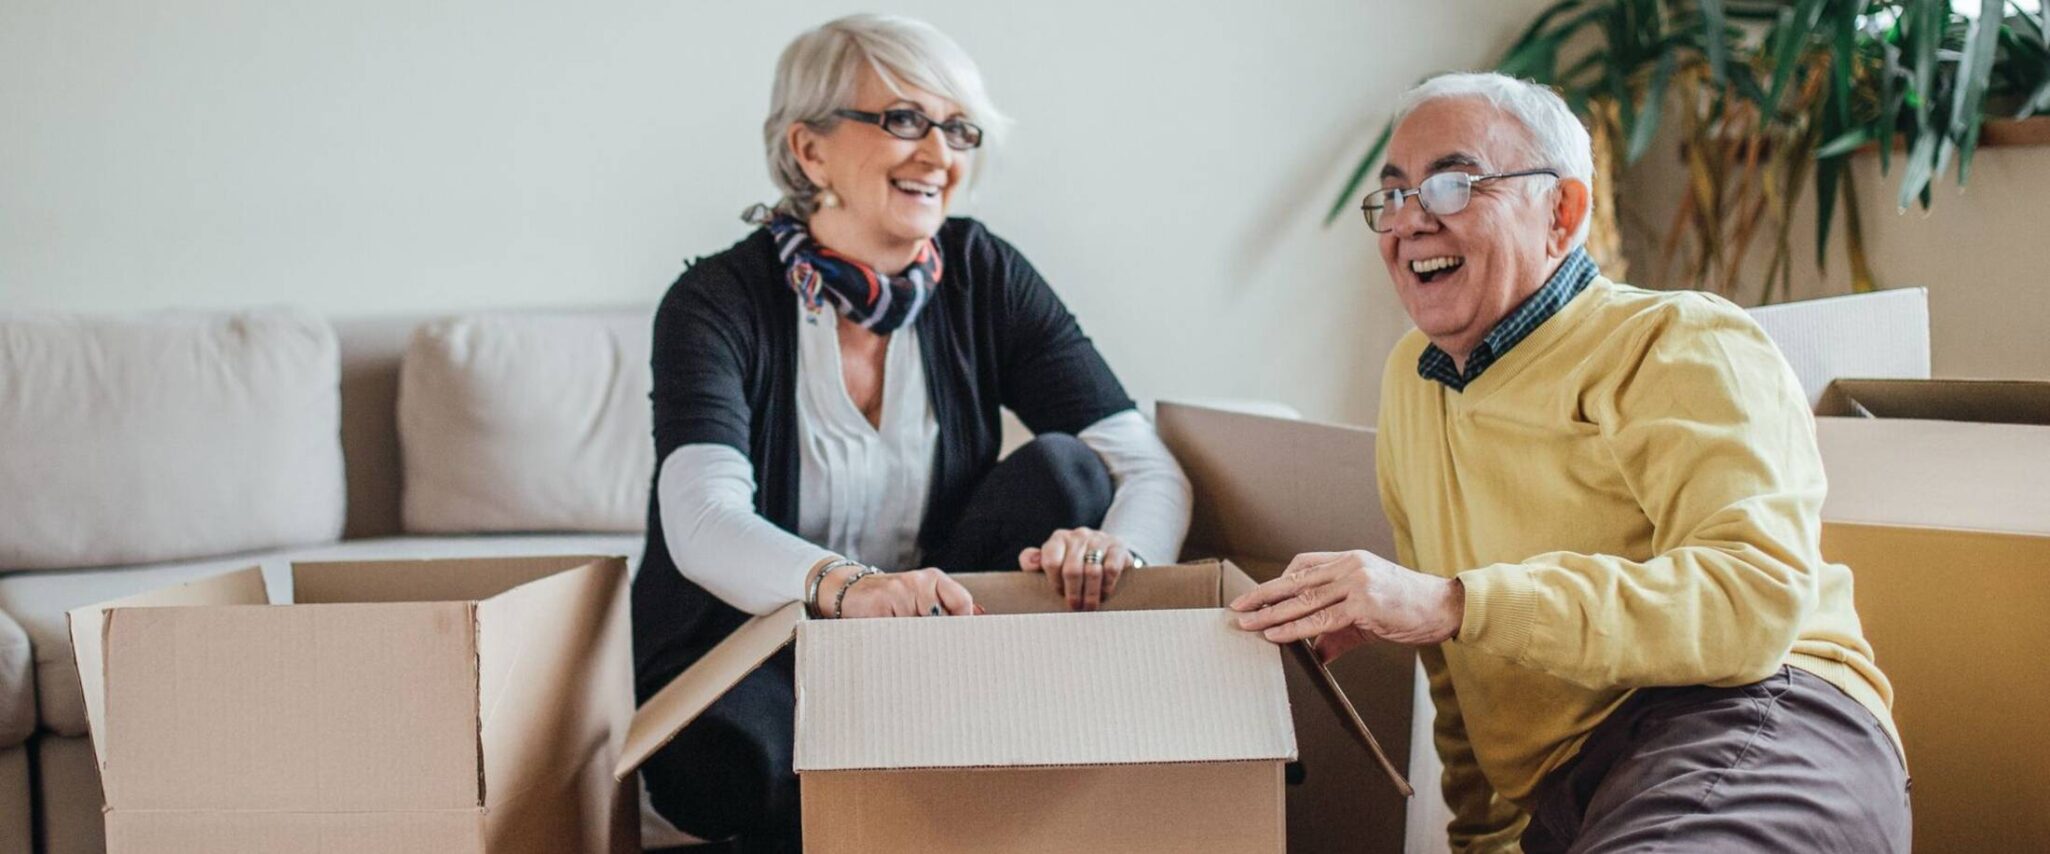 An older man and woman laugh while they pack boxes